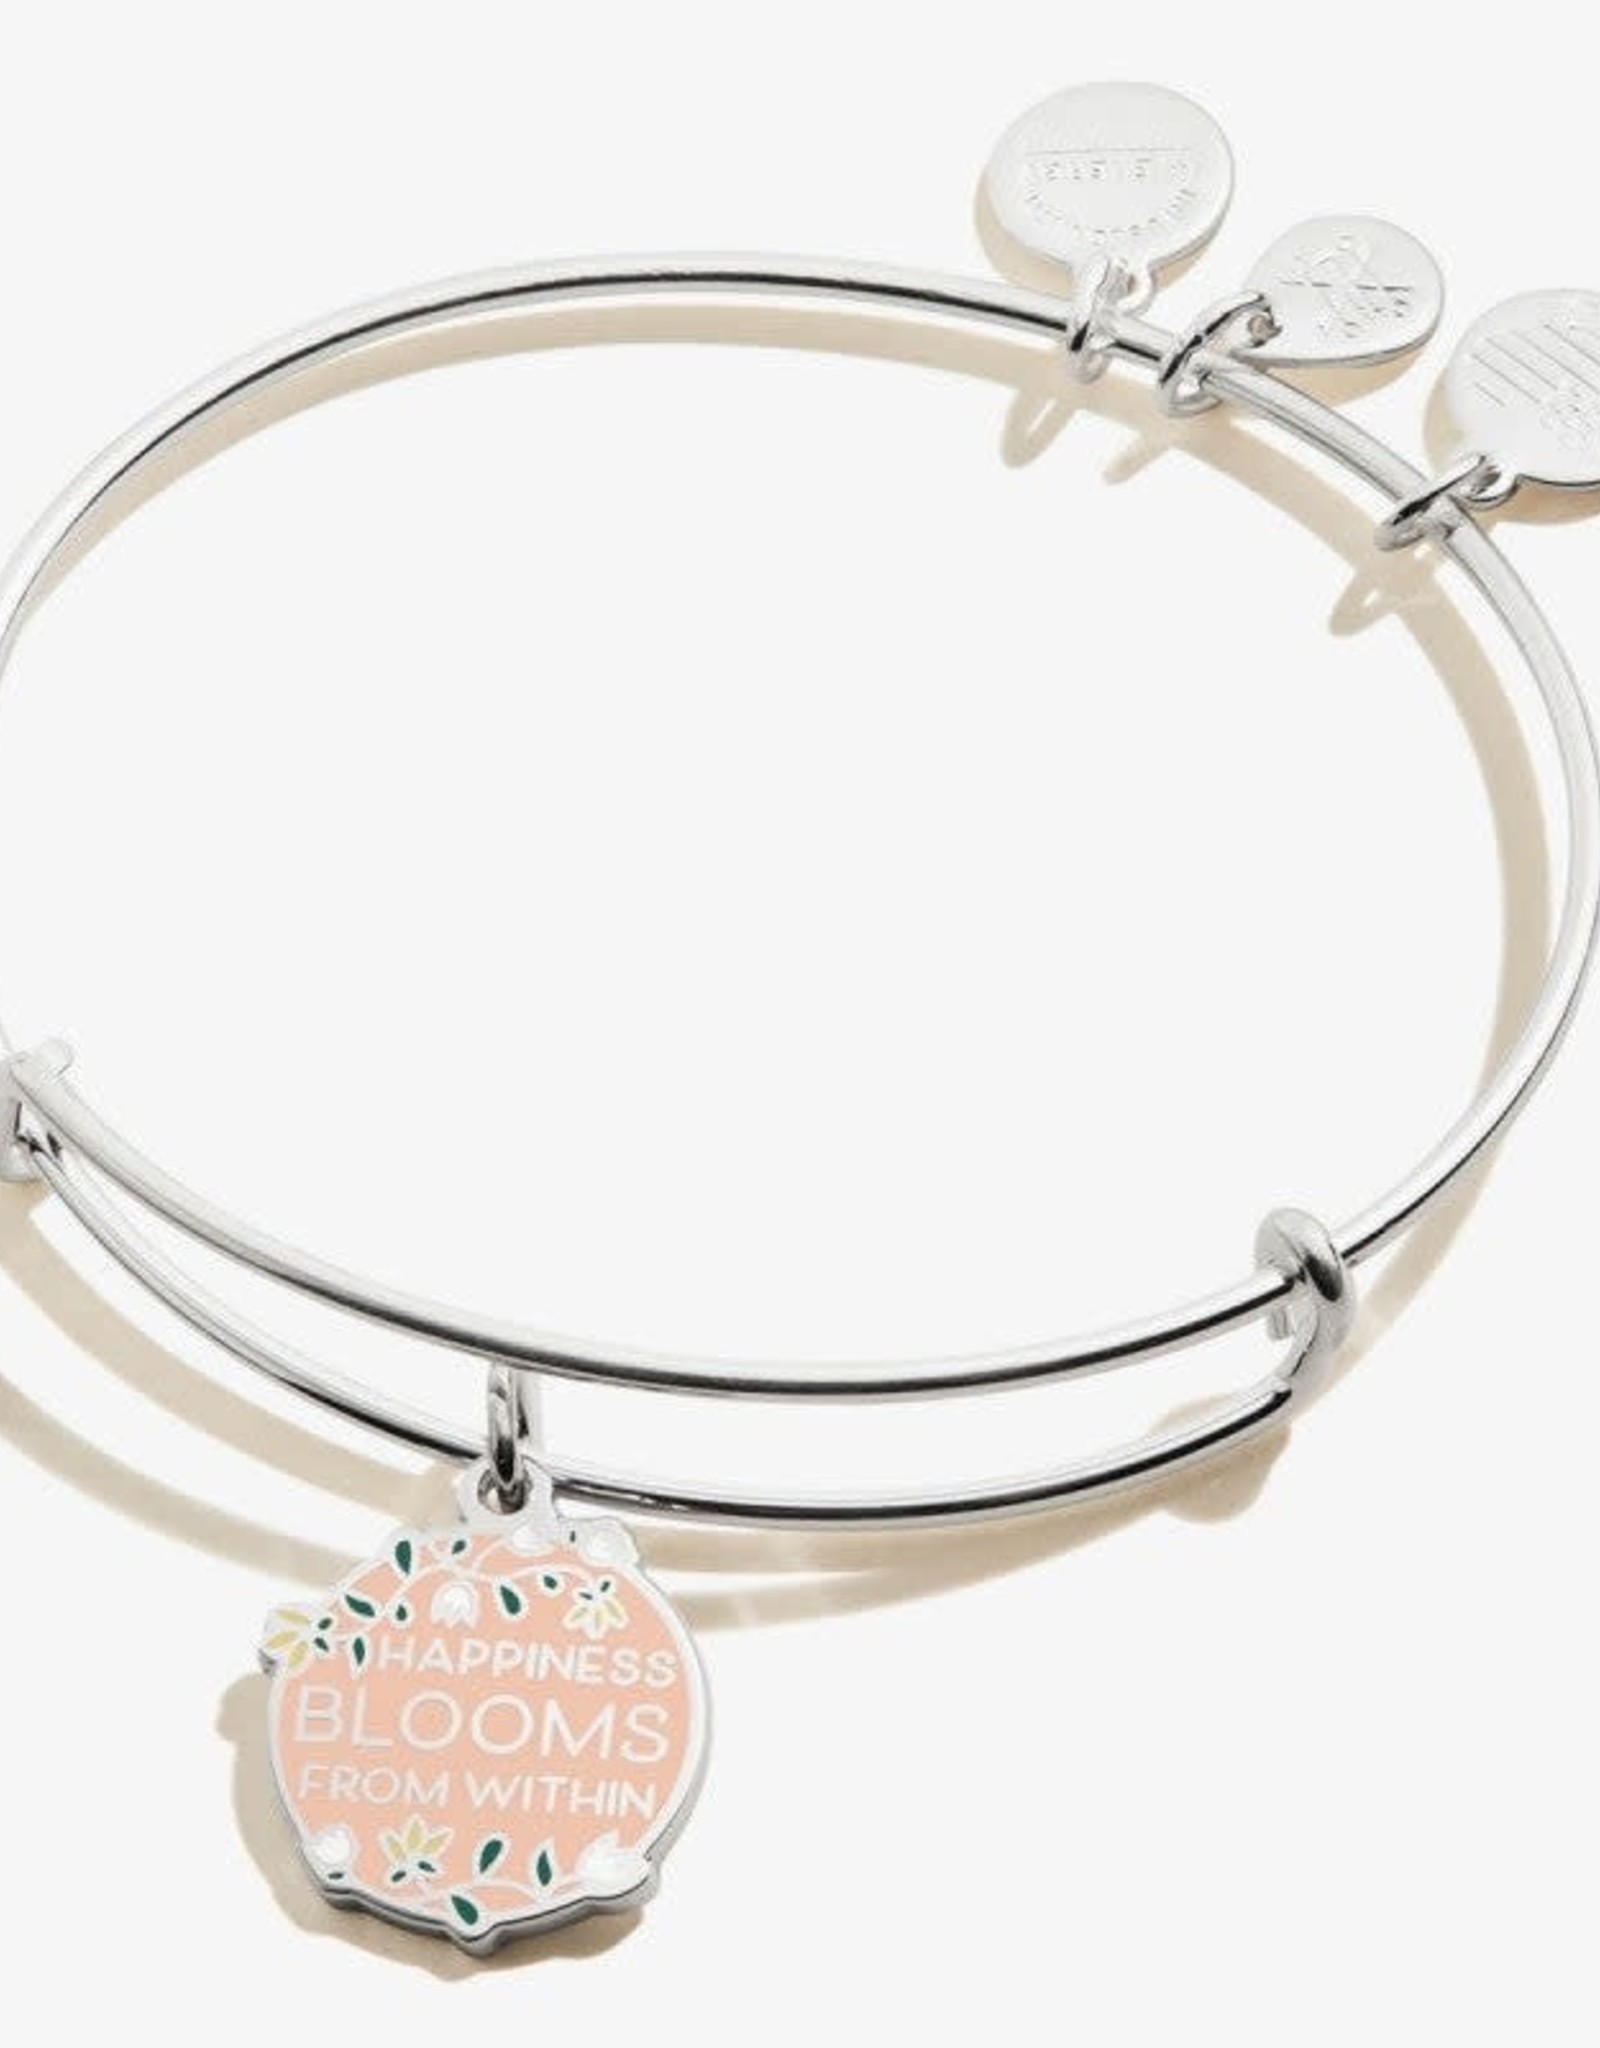 Alex and Ani Alex & Ani, Color Infusion Happiness Blooms from Within, SS